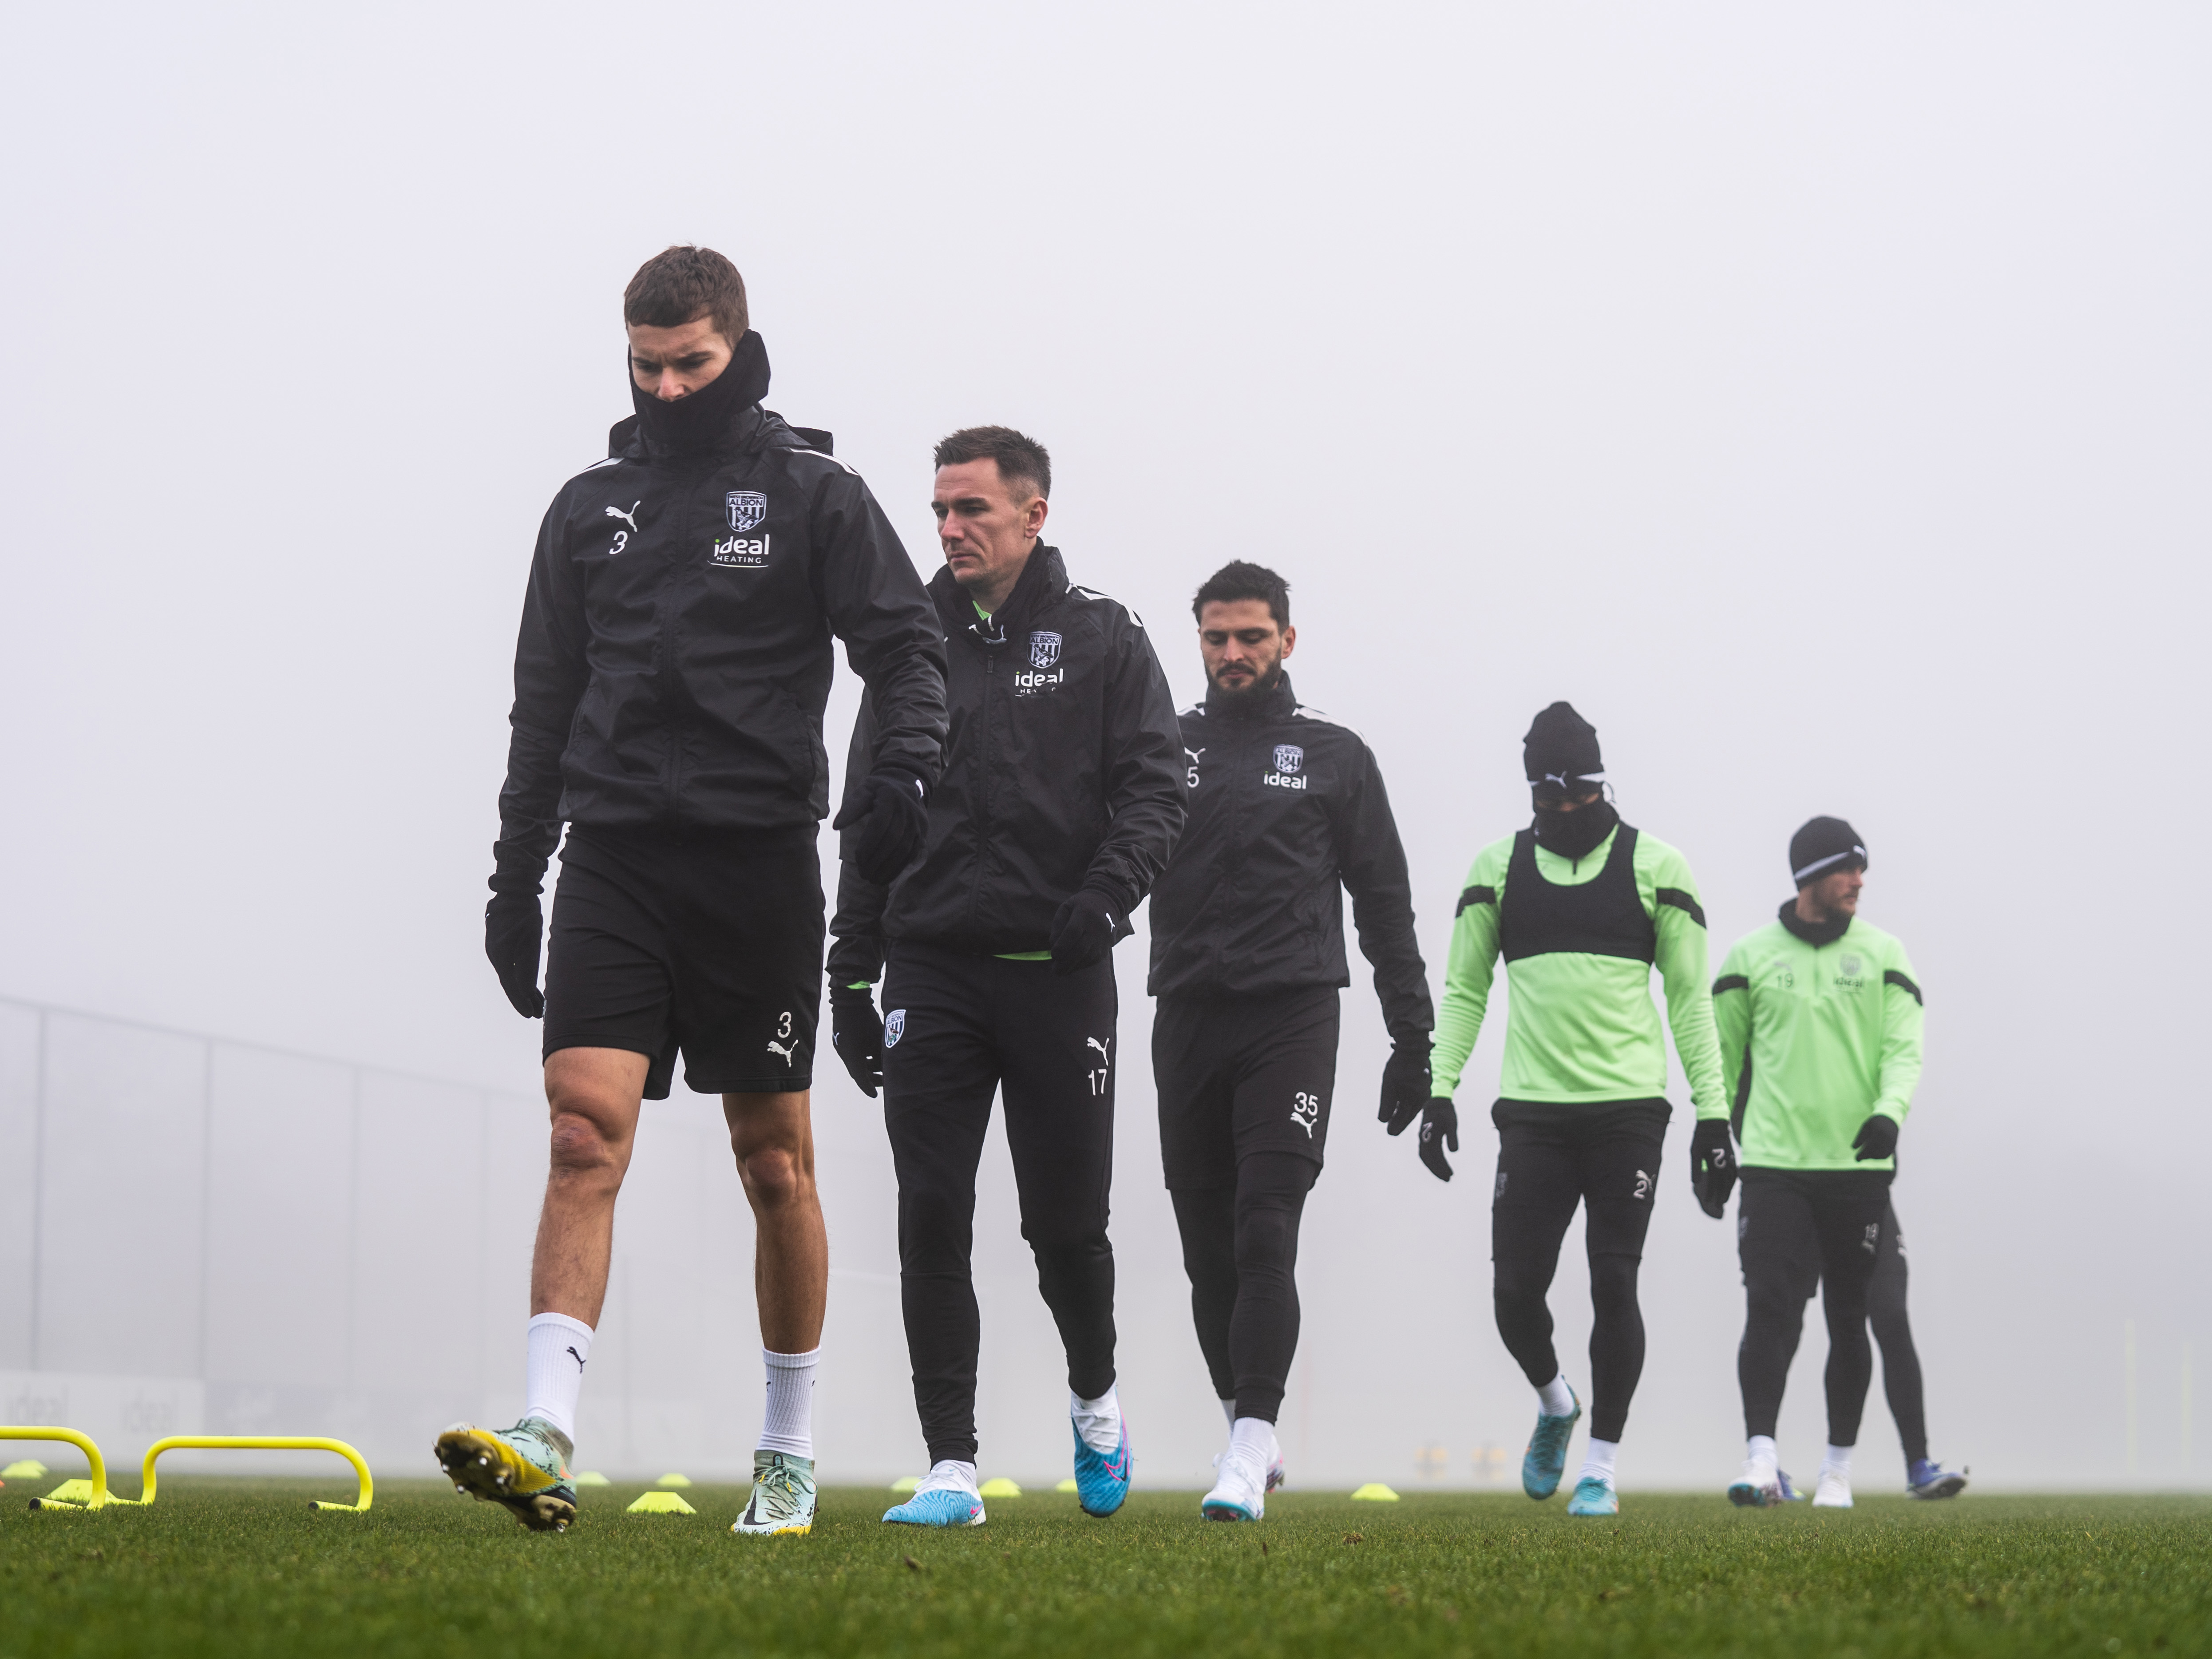 Albion players training in the fog